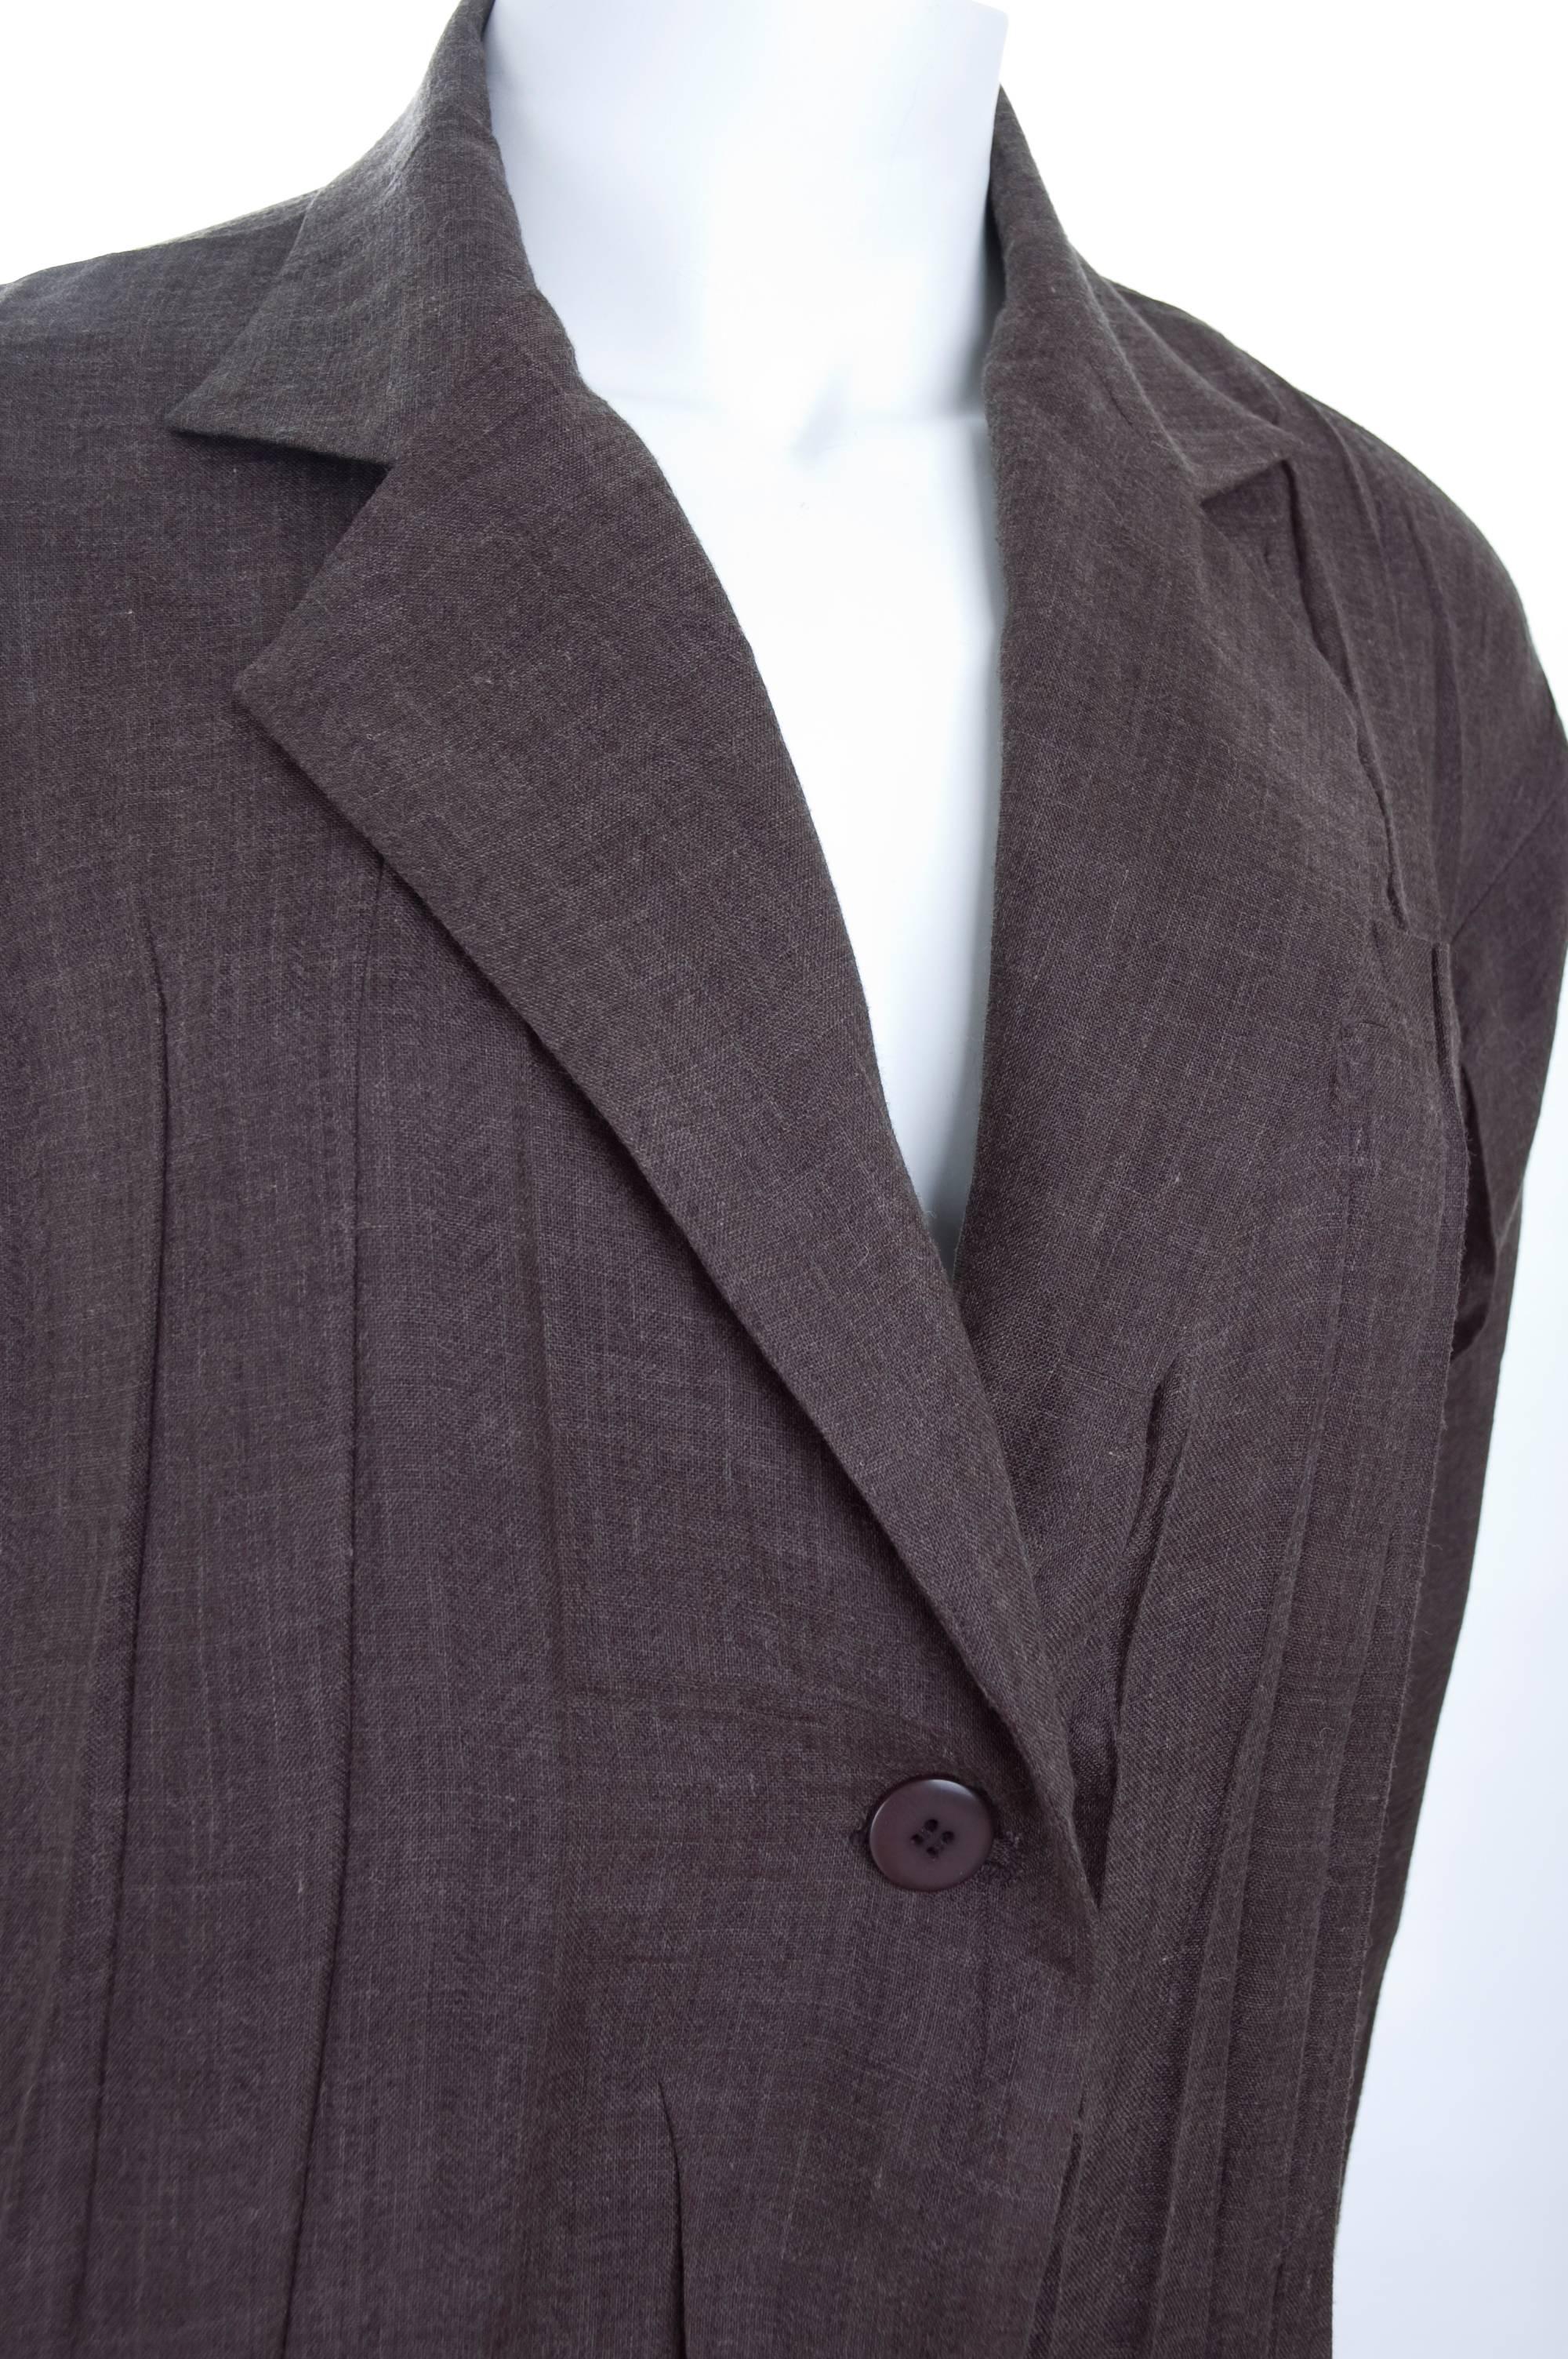 Issey Miyake Vintage Pleated Coat in Charcoal Size 3 In Excellent Condition For Sale In Hamburg, Deutschland